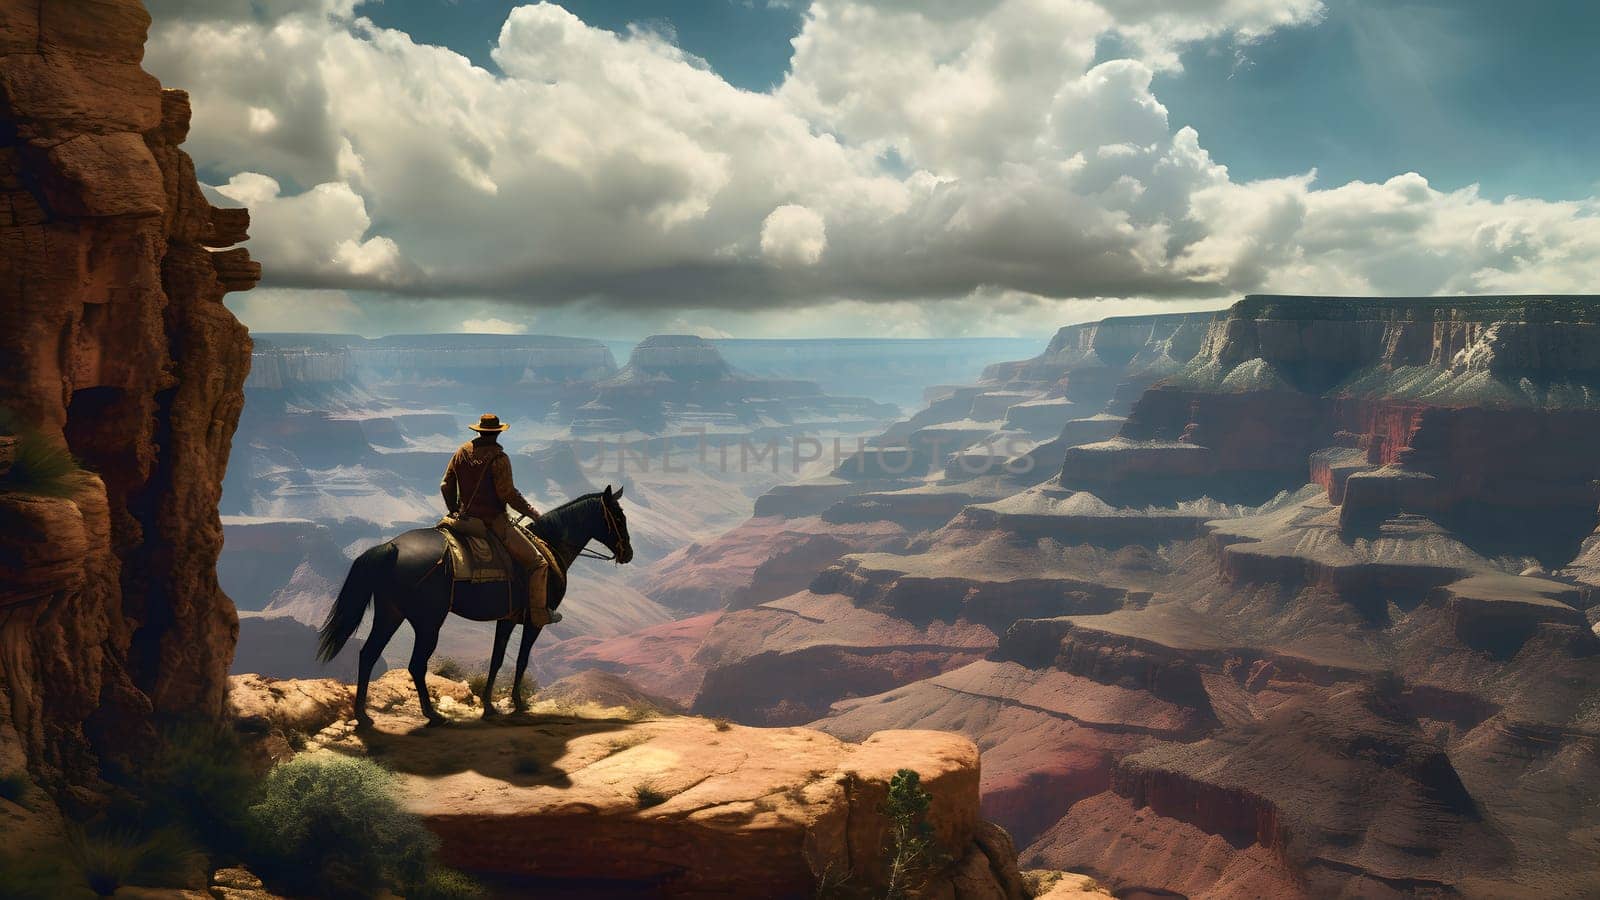 cowboy on the horse at edge of the grand canyon, neural network generated photorealistic image by z1b